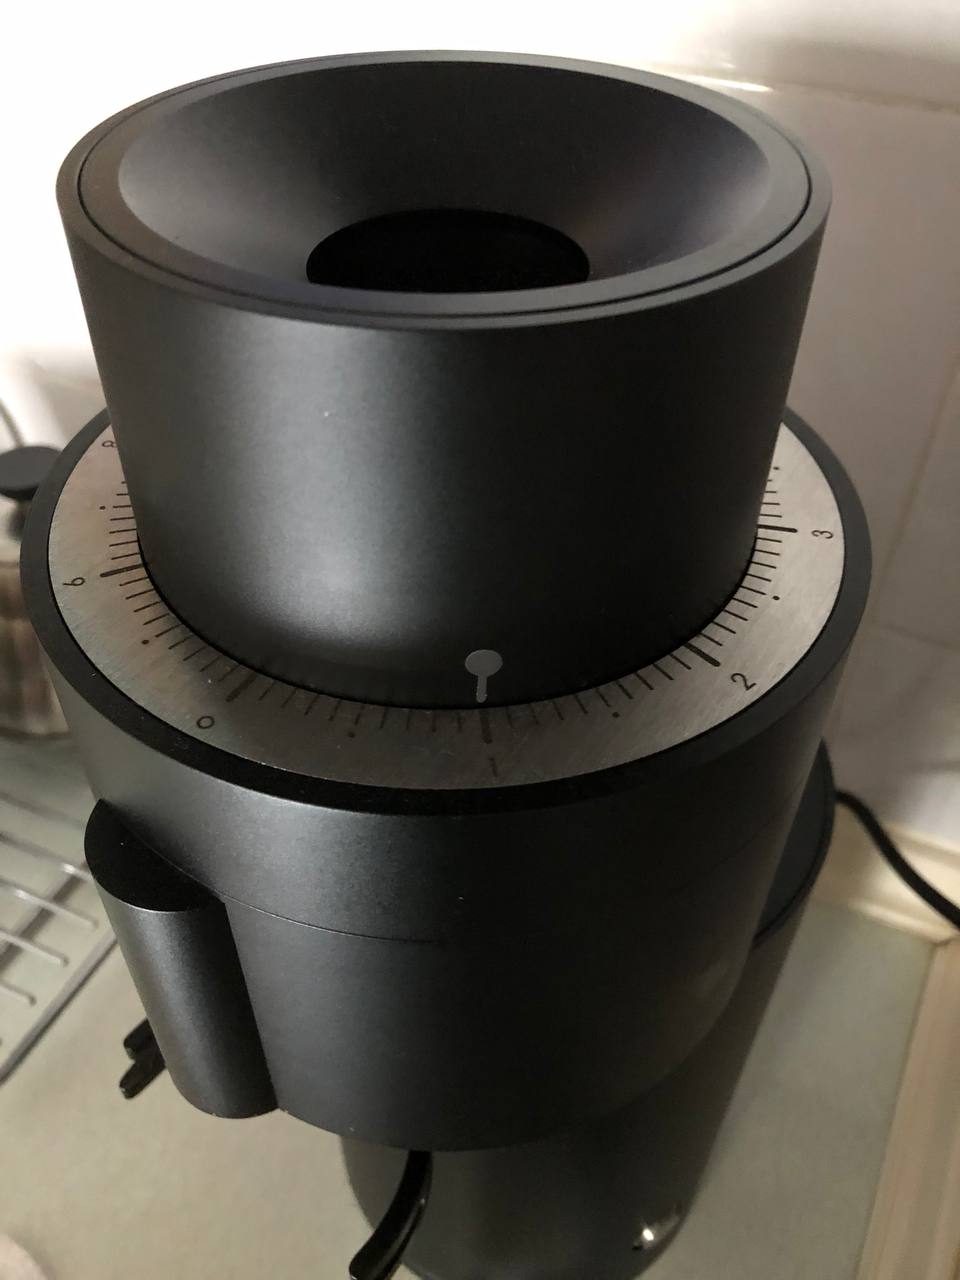 The P100's open bean intake funnel has a sticker with an arrow that points to the current grind size. There is a number scale that runs along the outer edge of the funnel numbered 0 to 9 with smaller lines for increments of 0.1 between each number.